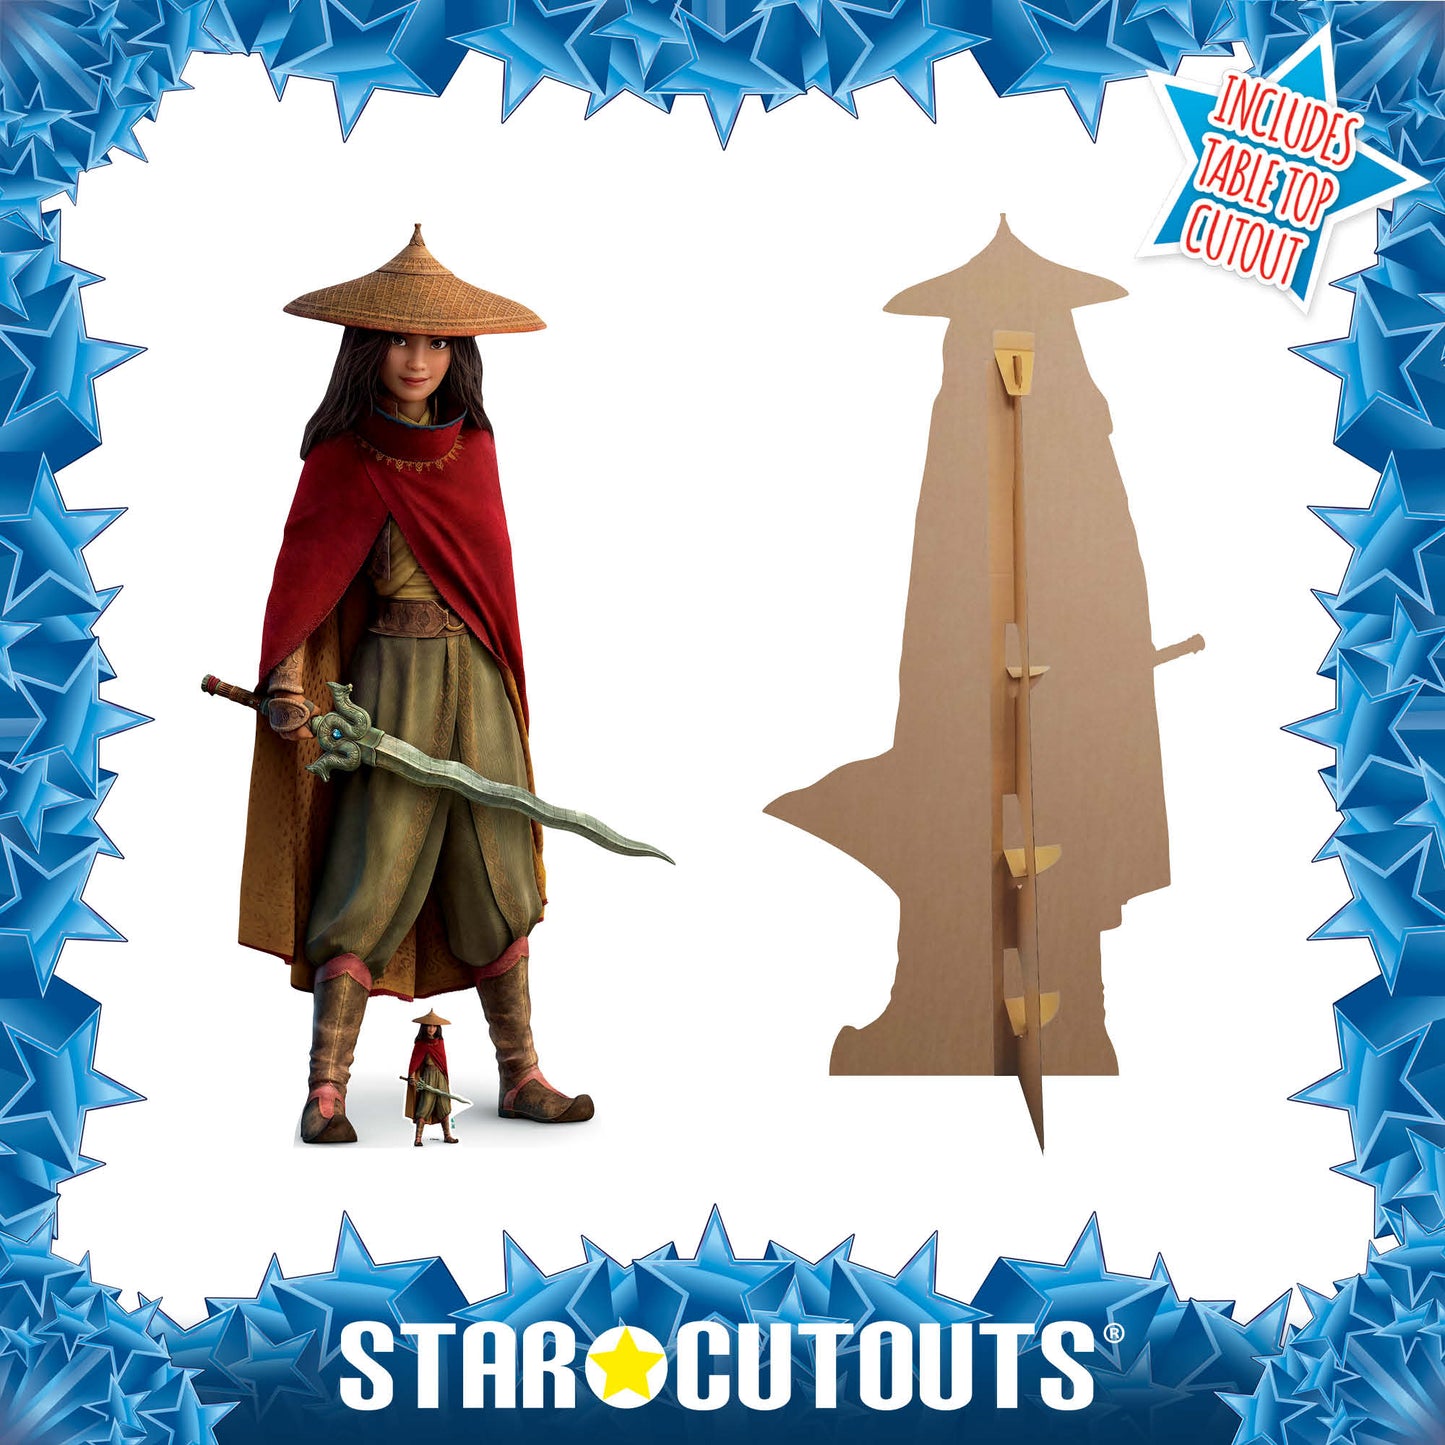 SC1673 Raya And The Last Dragon With Sword Cardboard Cut Out Height 189cm